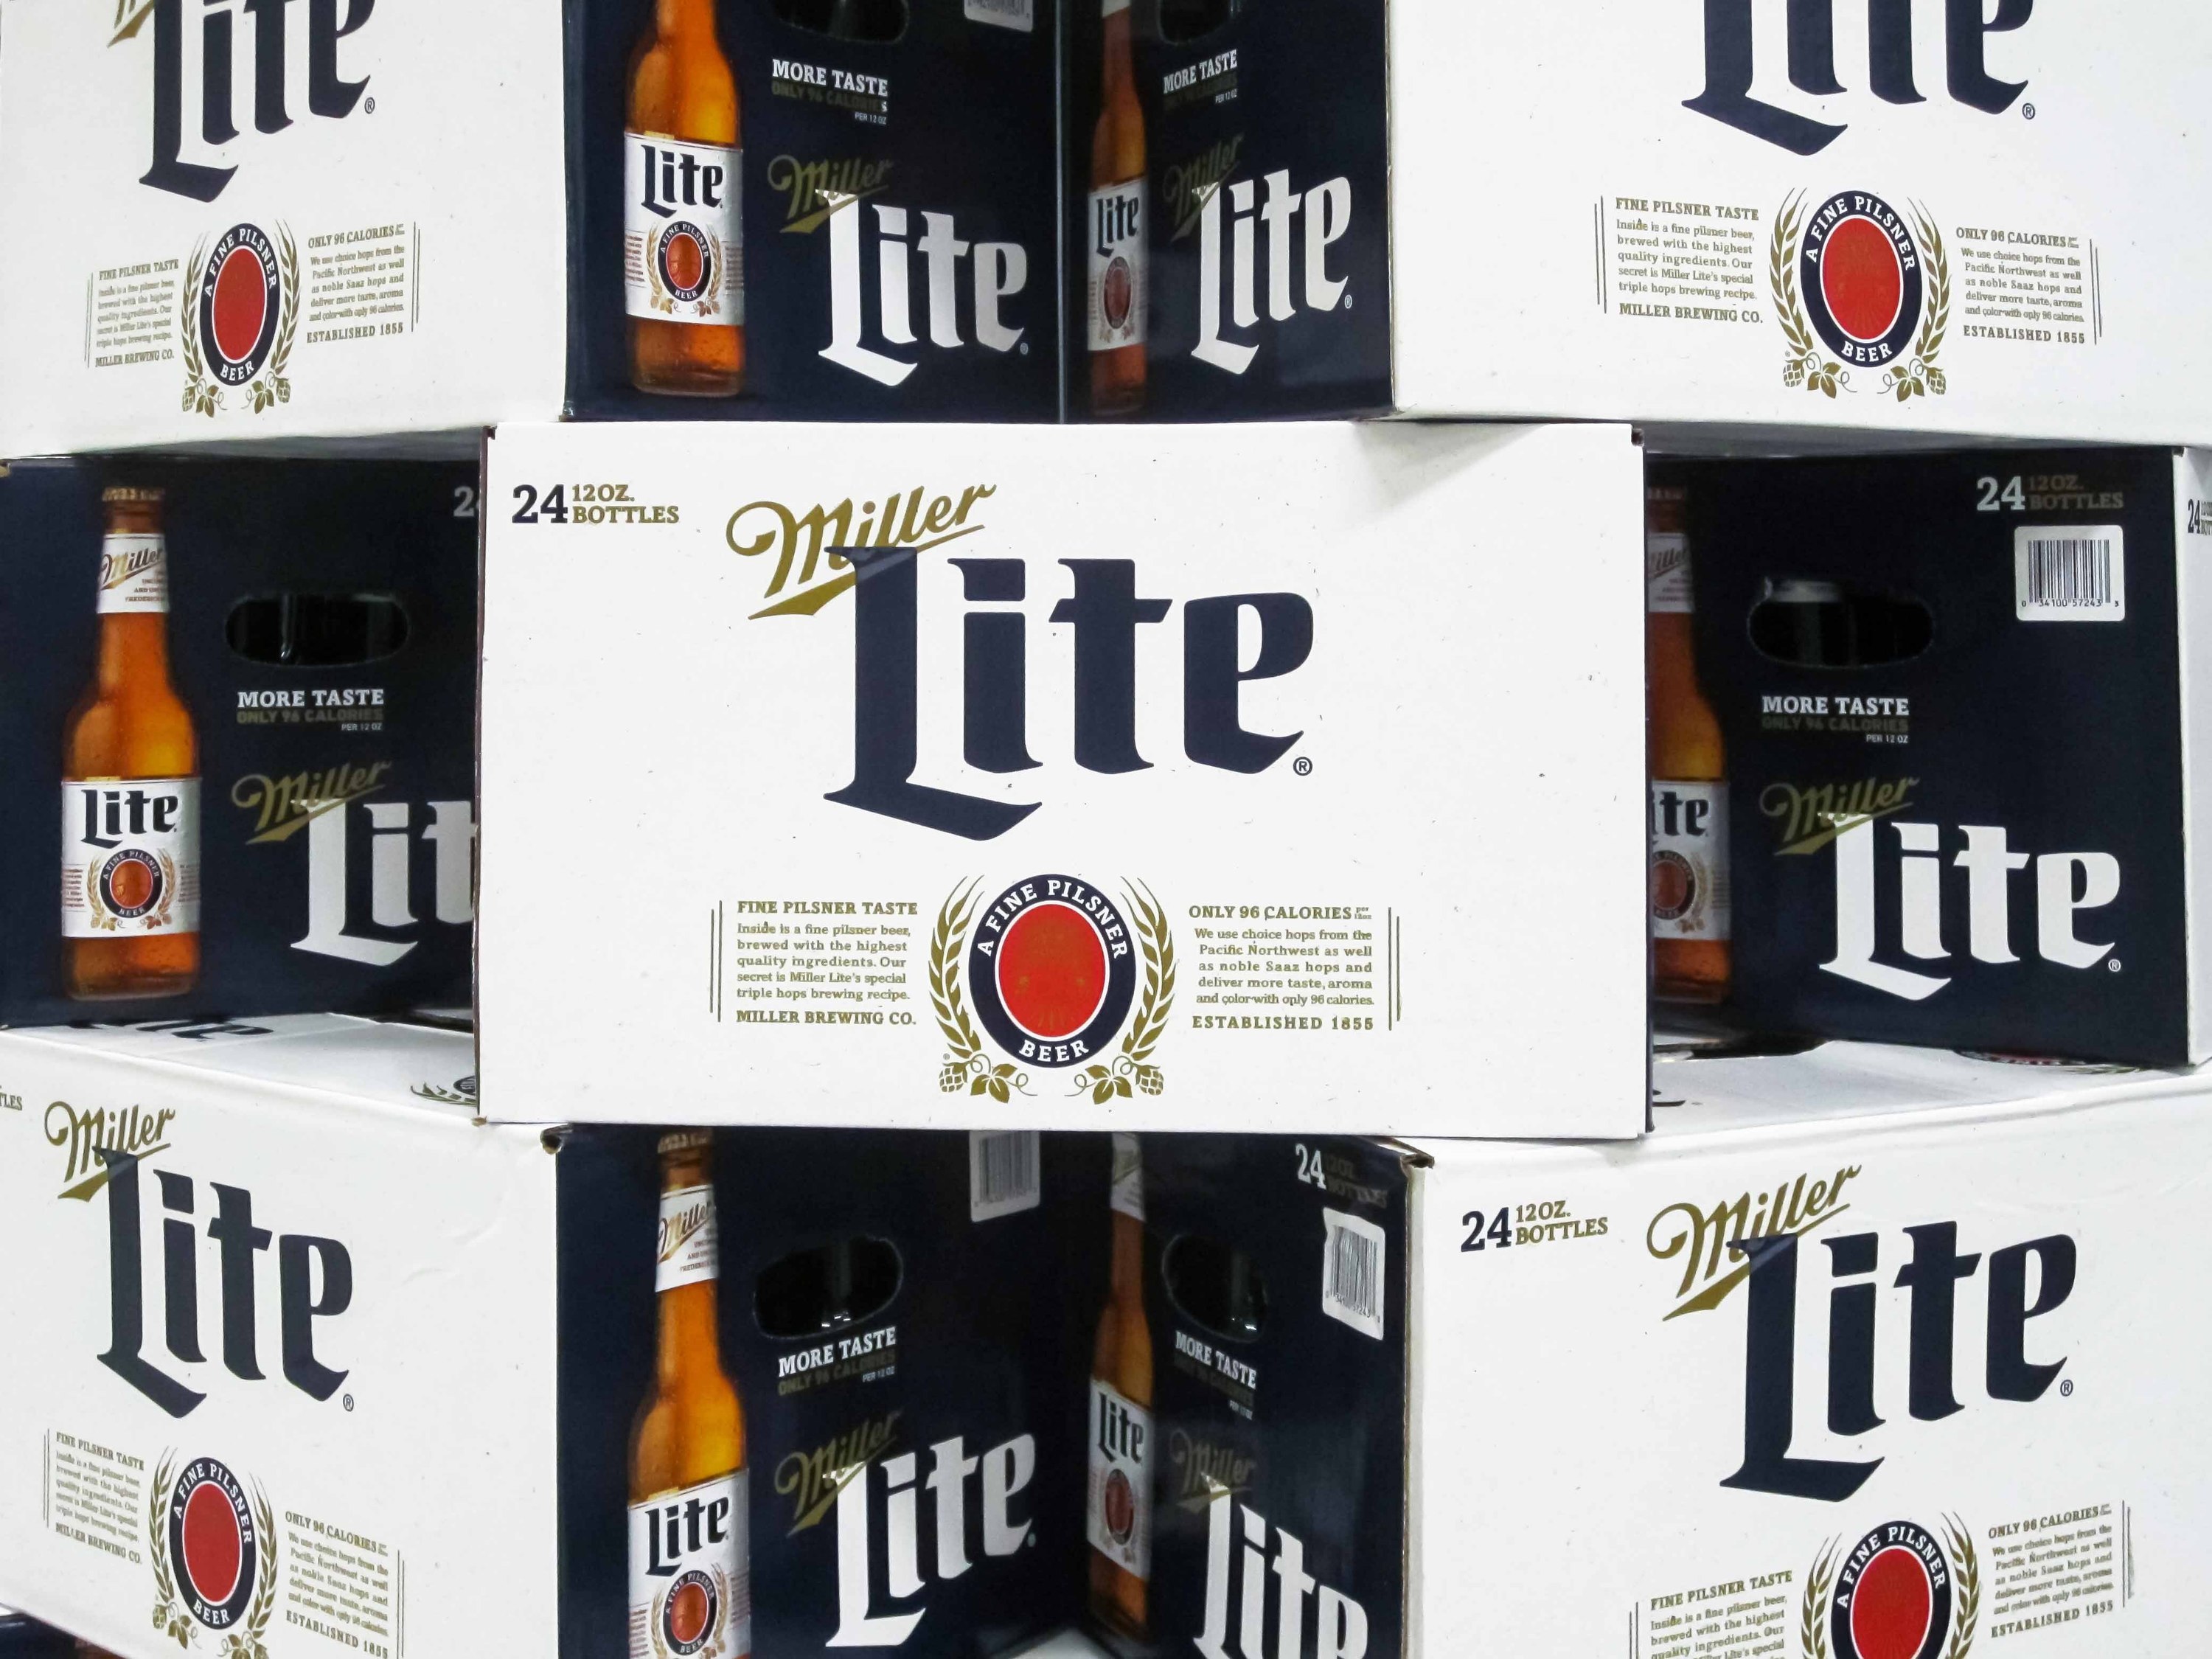 miller-lite-is-giving-away-free-beers-to-folks-who-live-in-these-80-cities